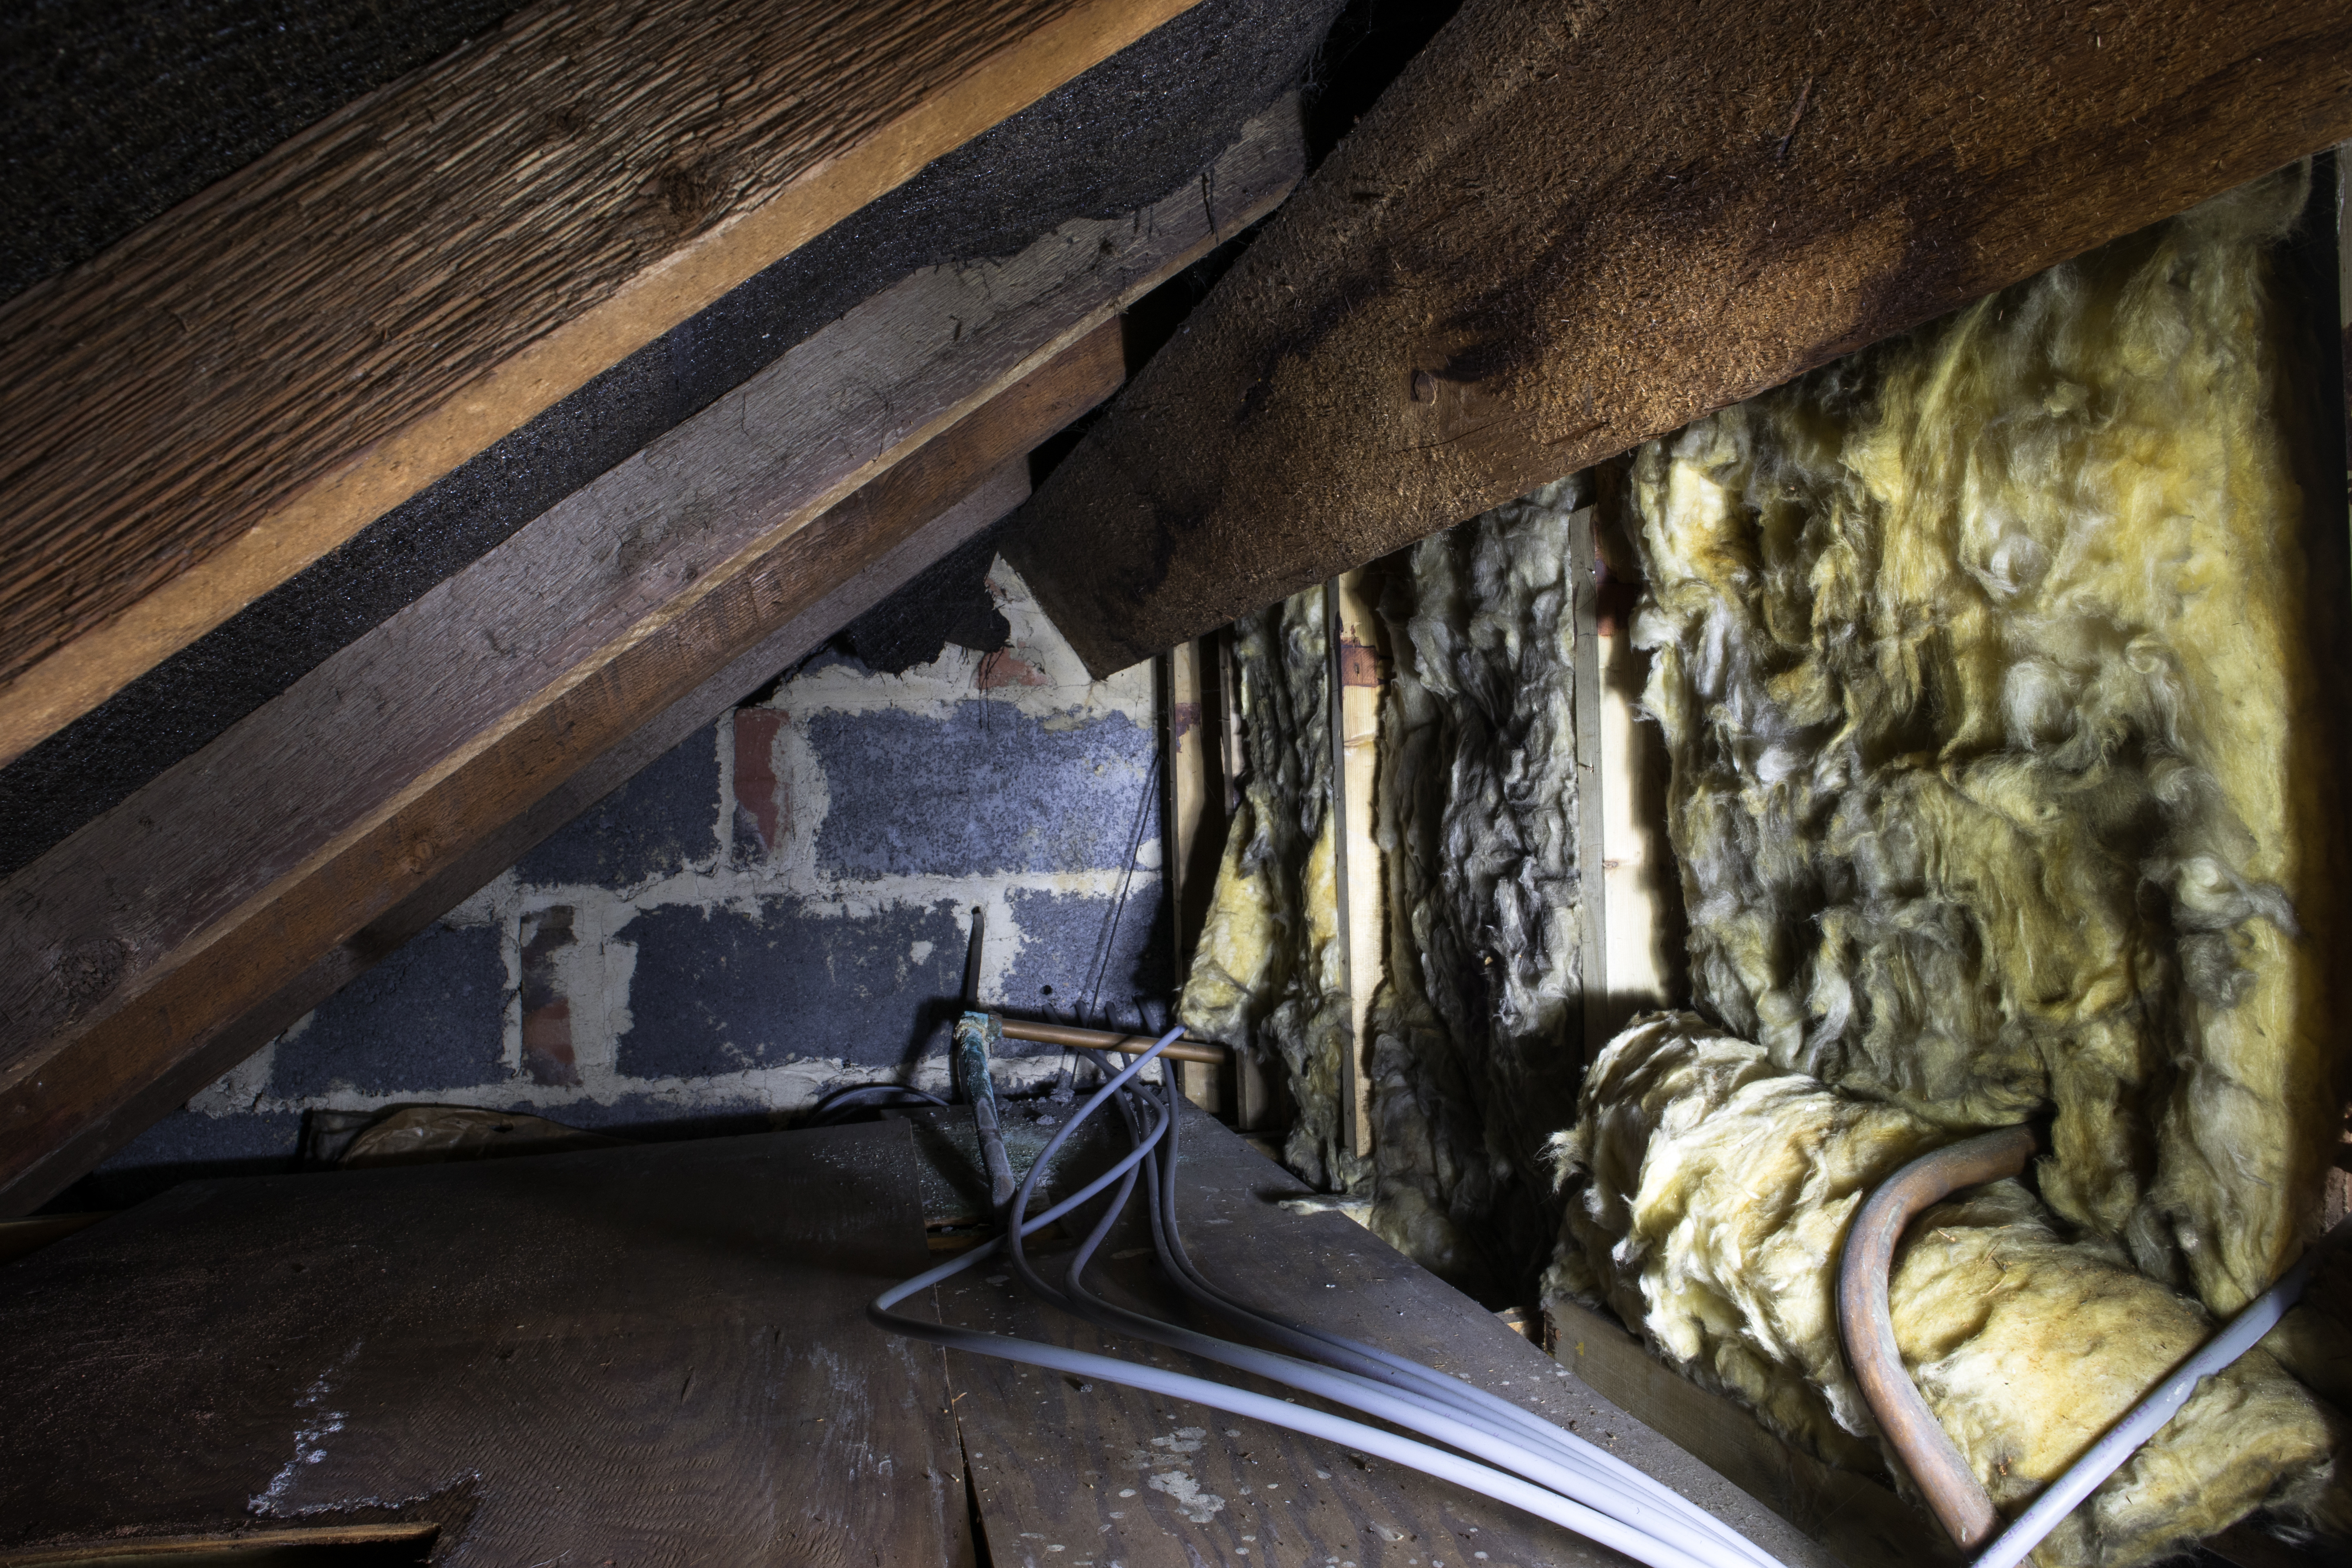 Crawl space under the eves of a house showing insulation